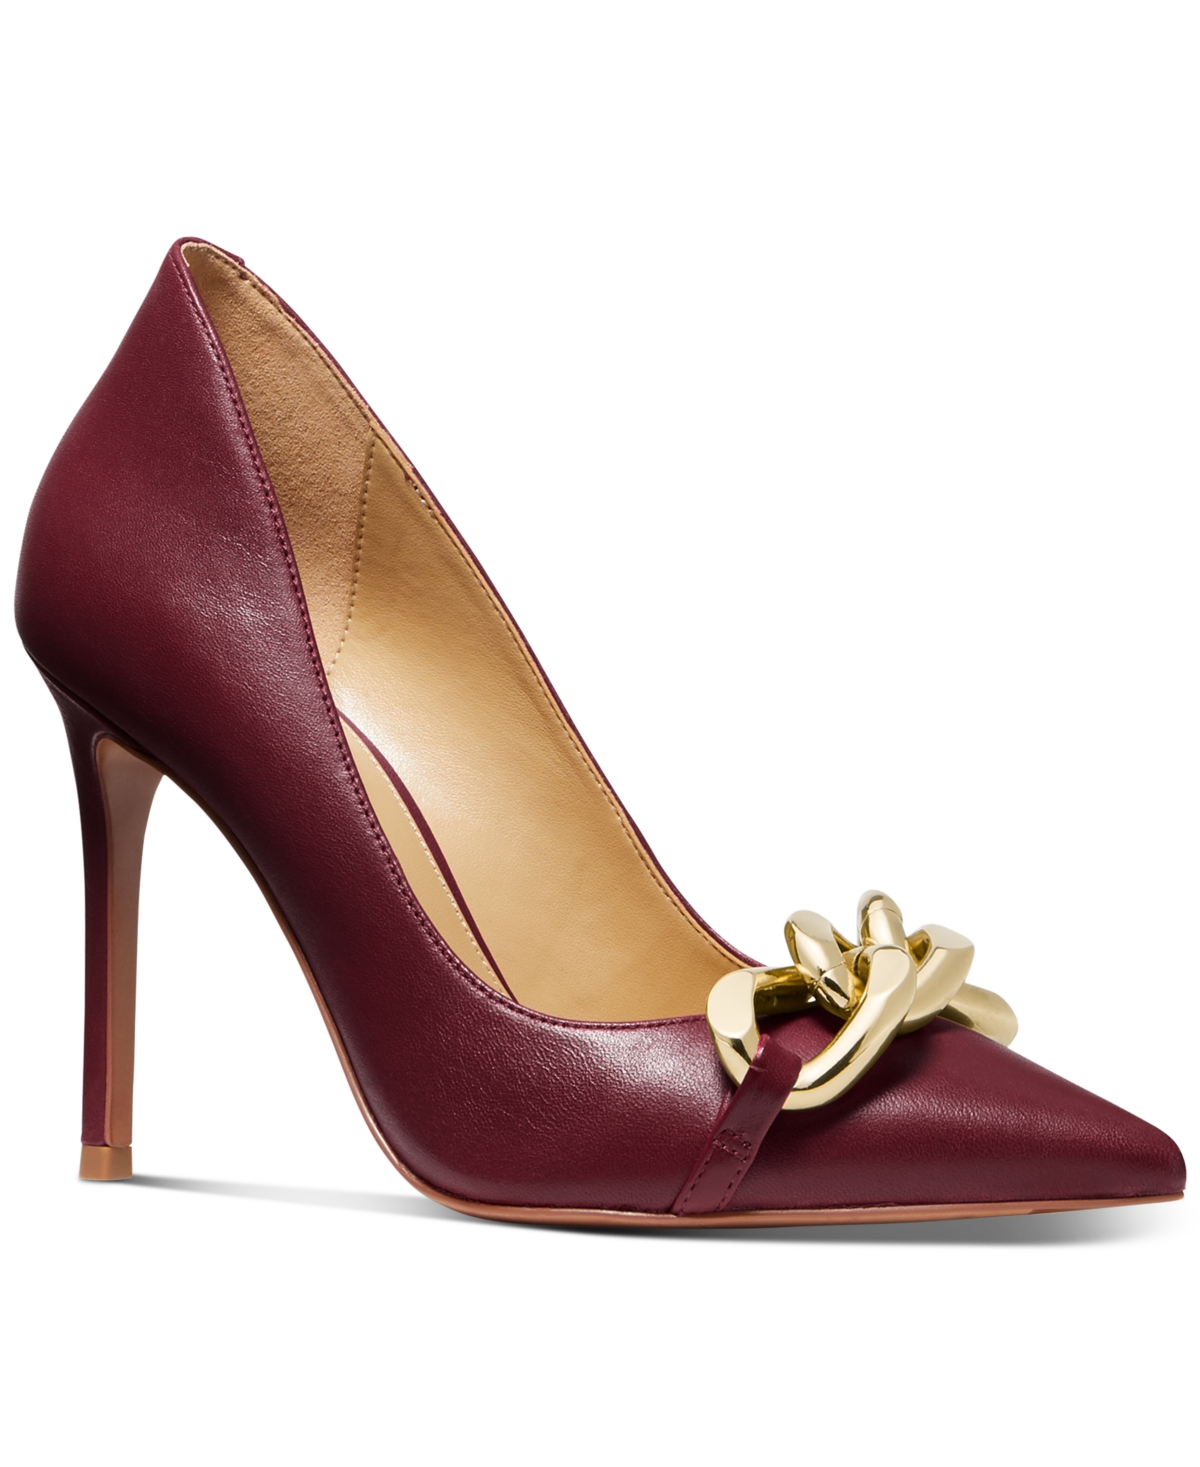 UPC 195512620973 product image for Michael Michael Kors Women's Scarlett Pointed-Toe Chain Pumps Women's Shoes | upcitemdb.com